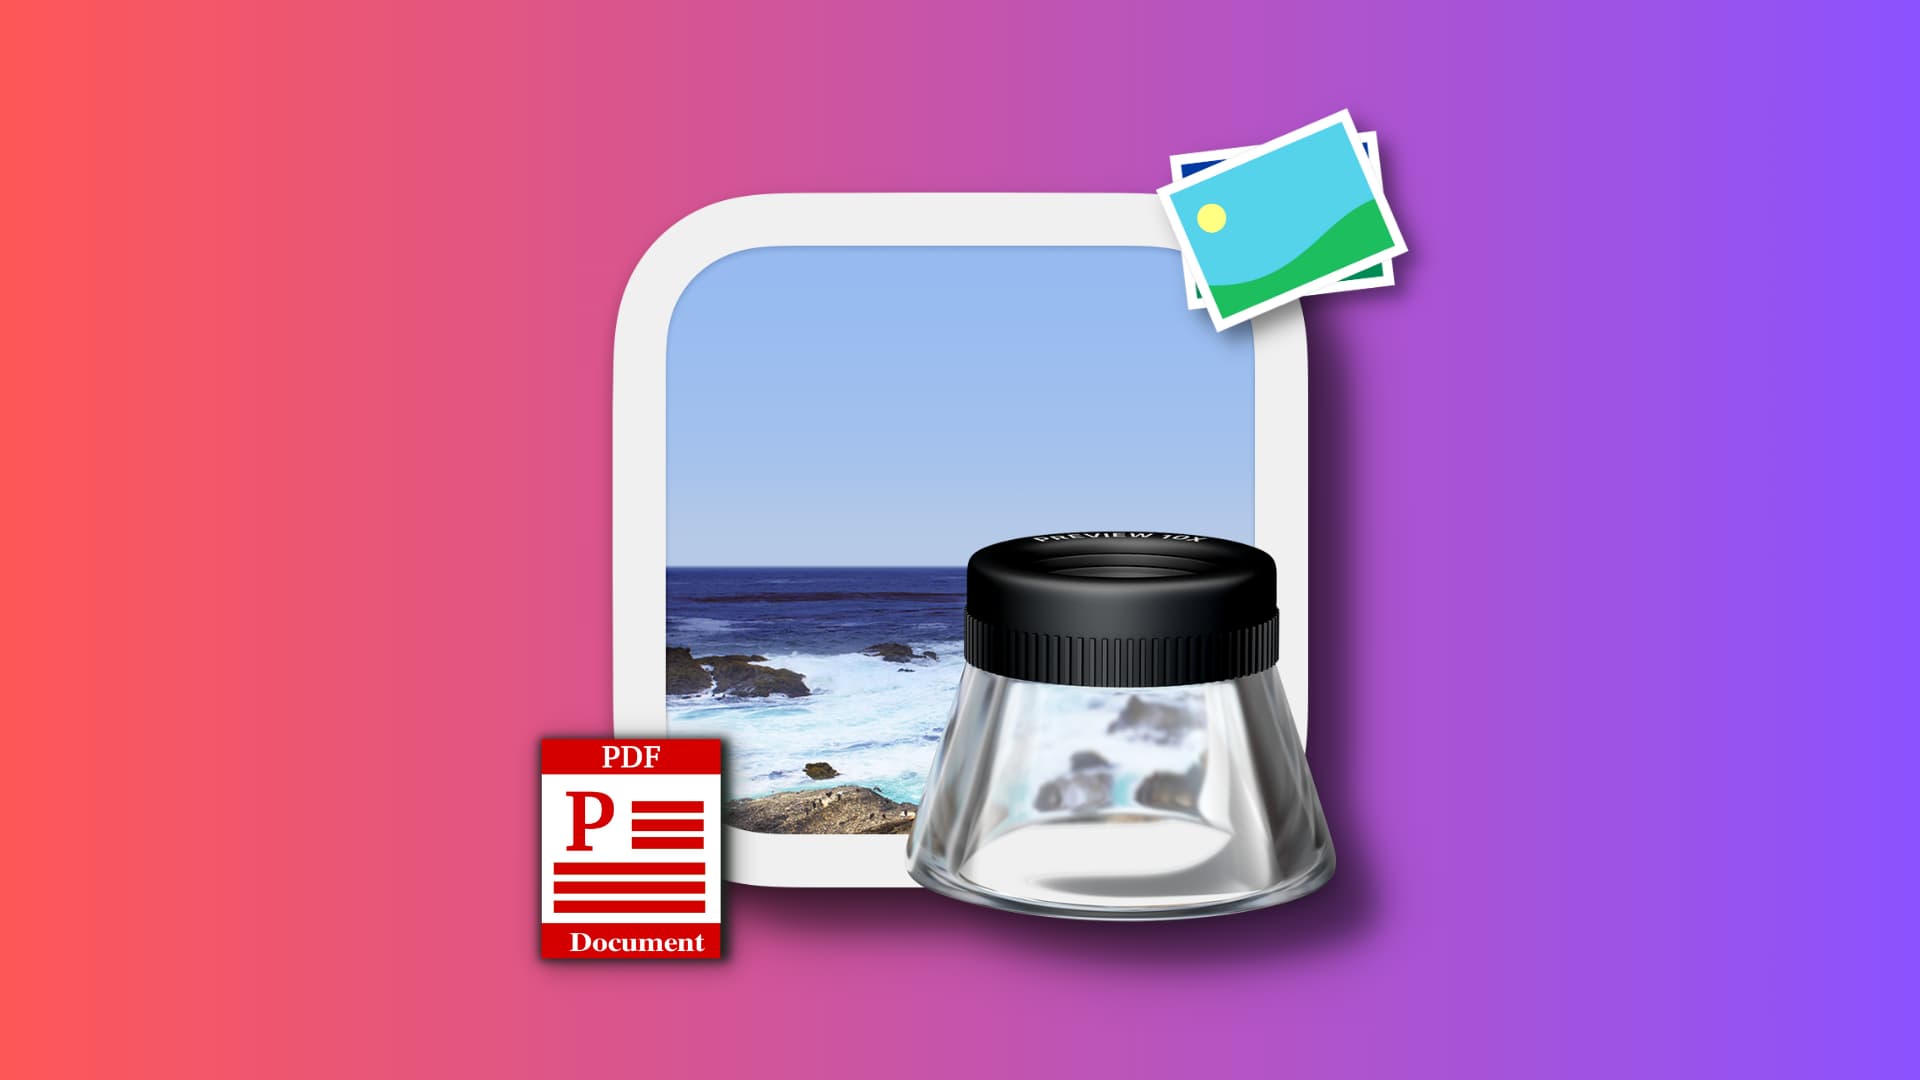 Preview app icon on Mac with extra icons for PDF and image